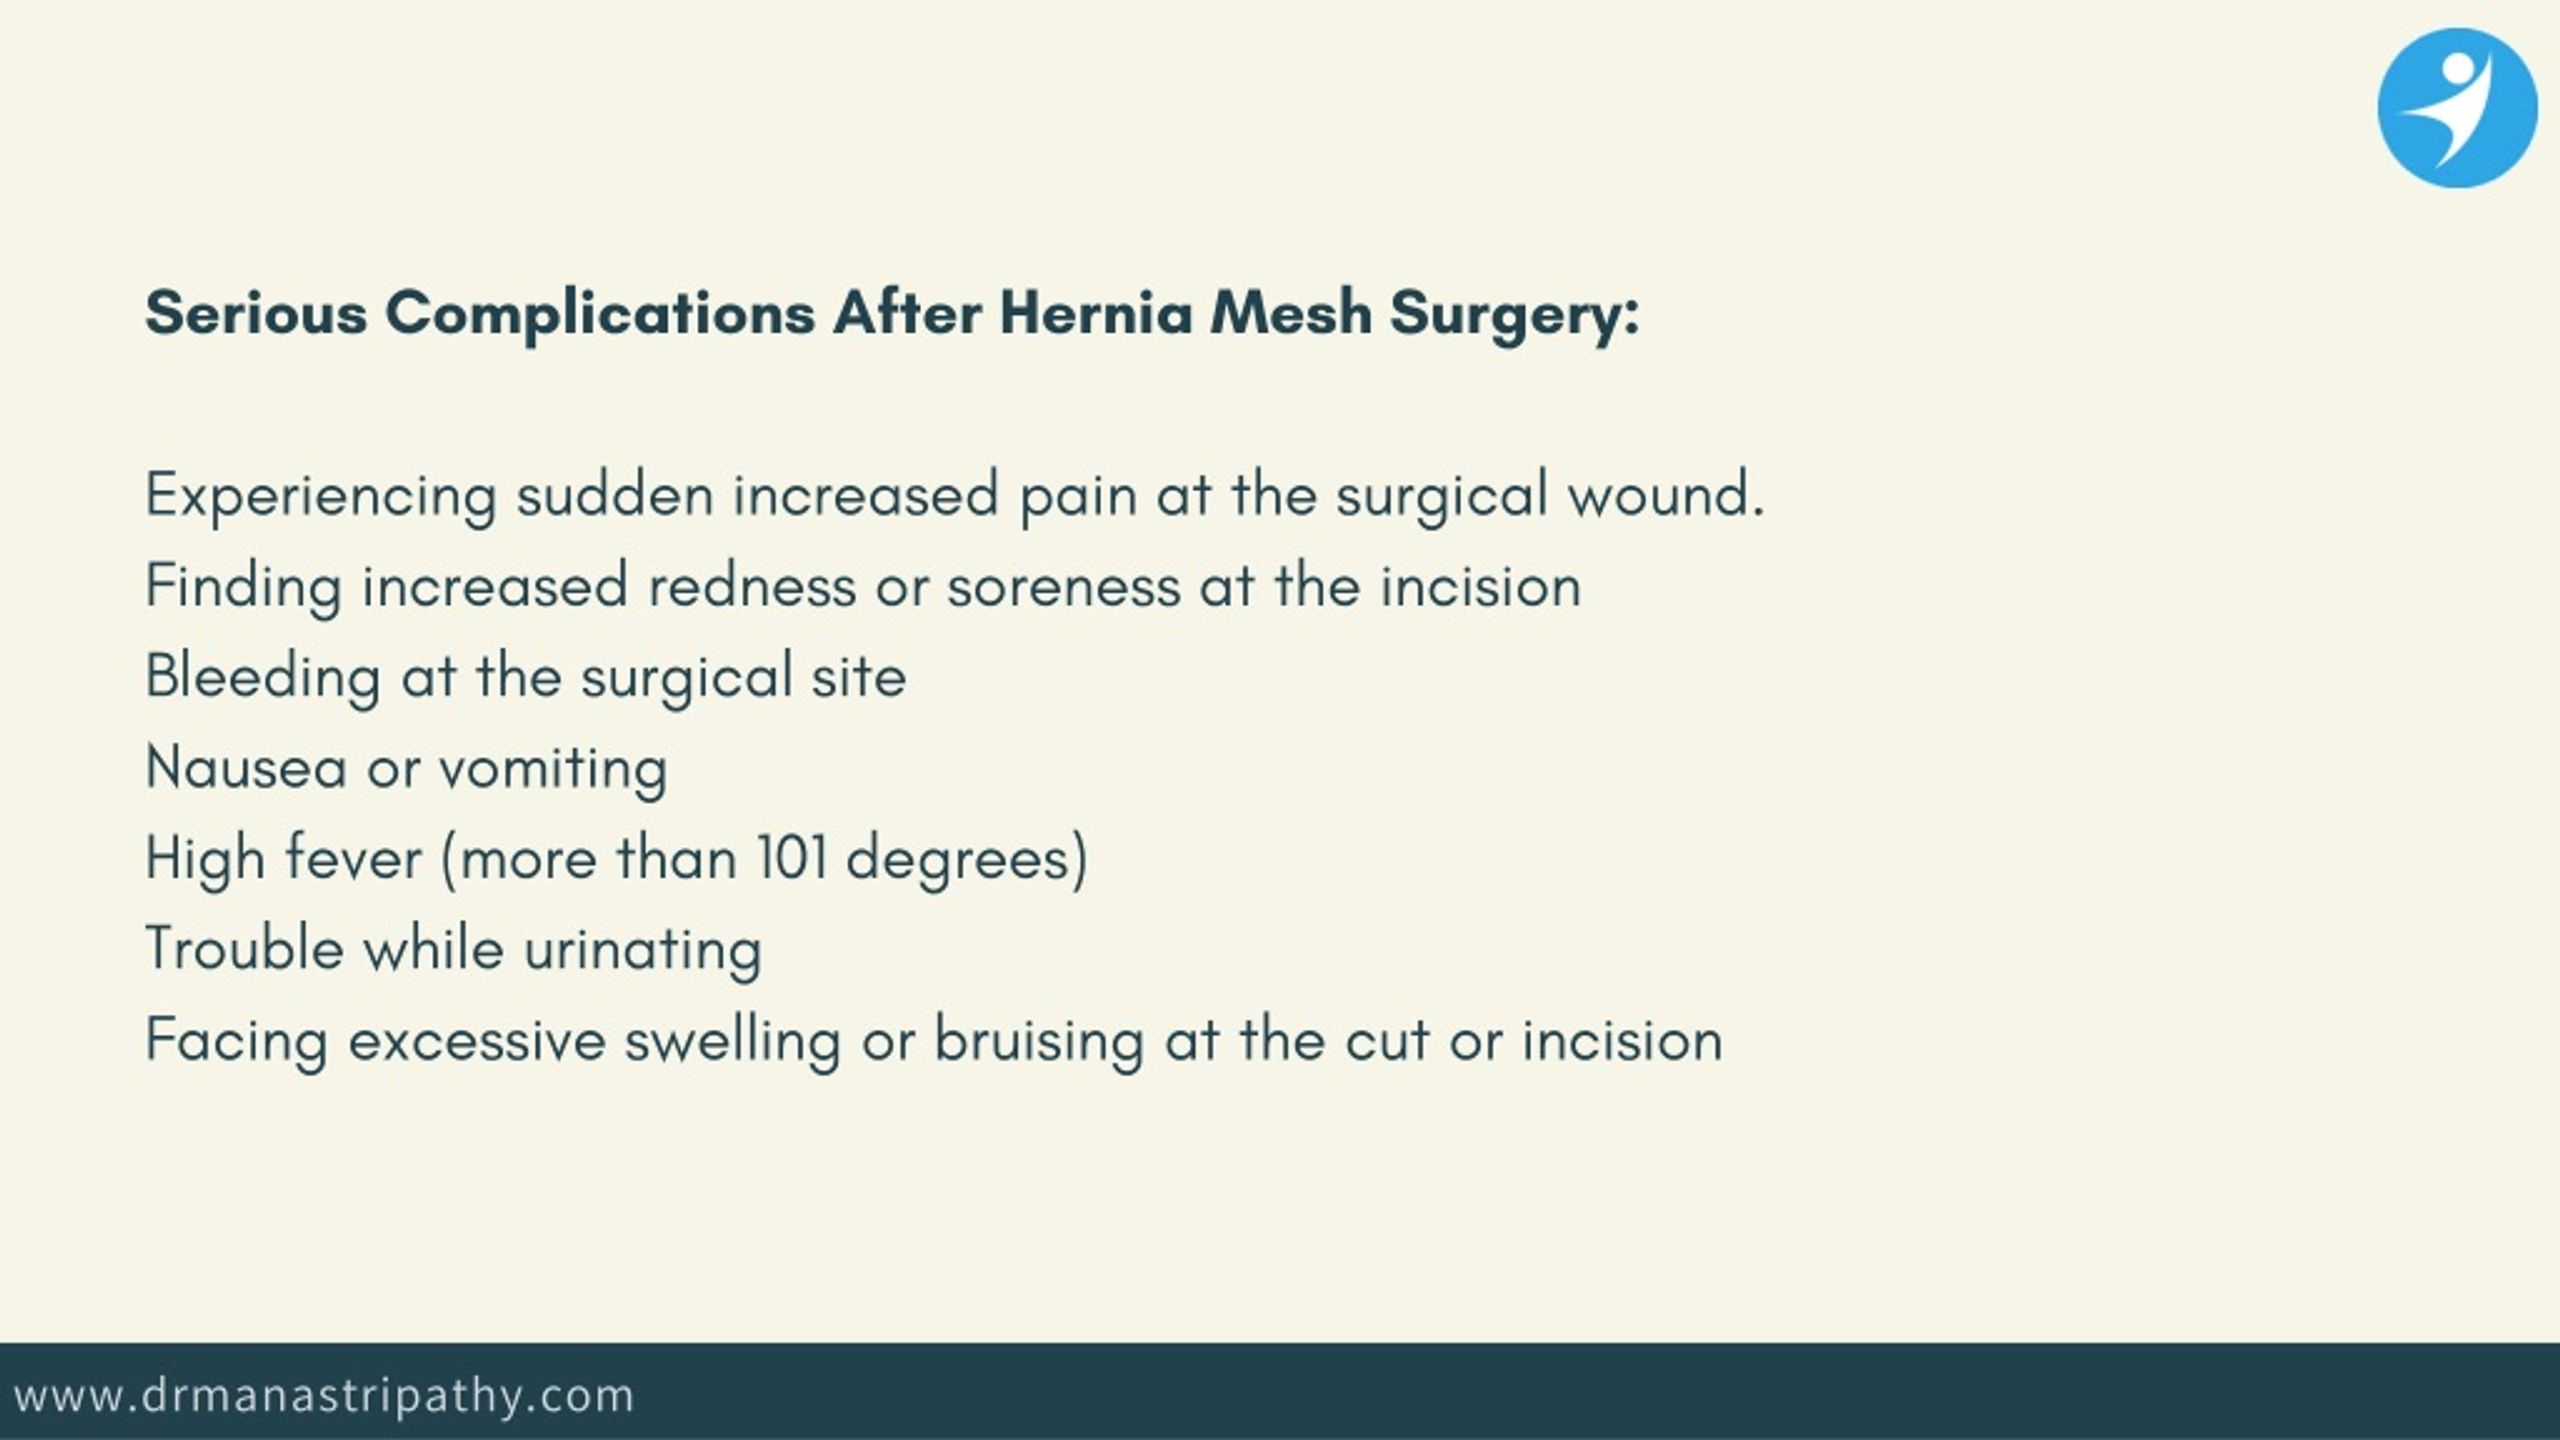 Ppt Best Hernia Surgeon In Hsr Layout Is Surgical Mesh Safe For My